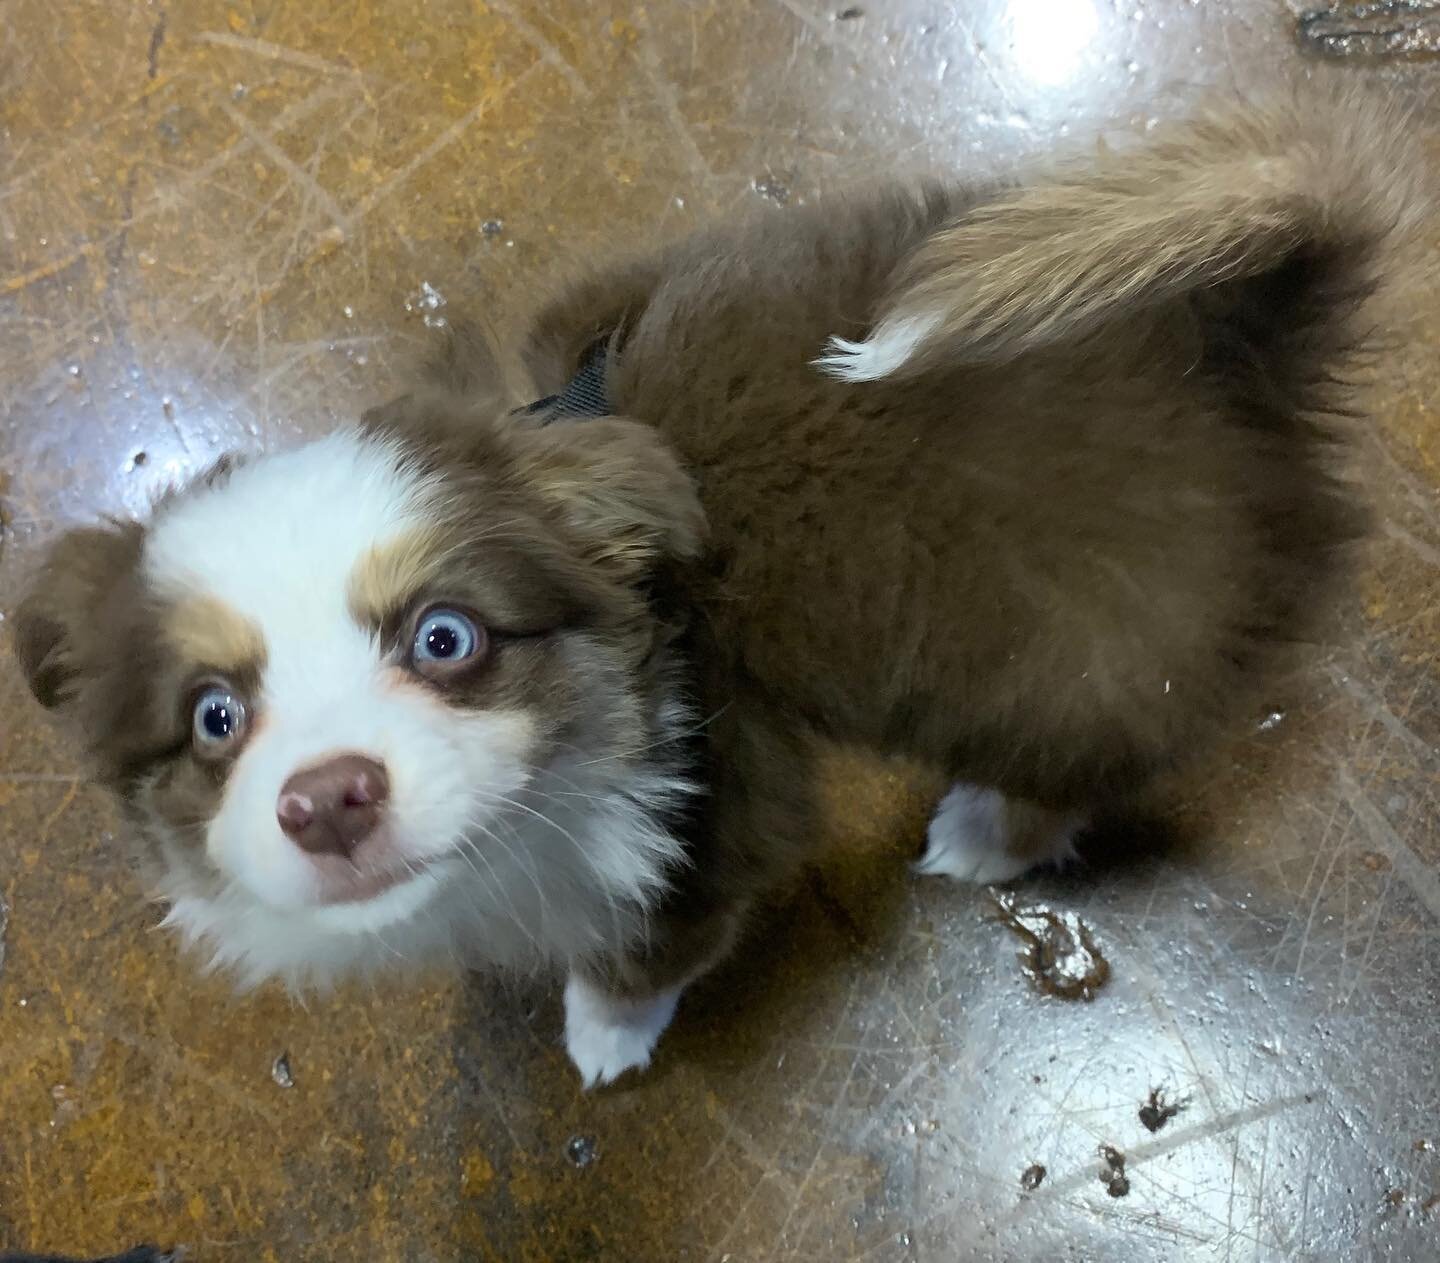 Student Spotlight: Ludo the mini Aussie 😍😎🤗!!! He came into his first Social Puppy class excited about the people, the space, the enrichment and the dogs. He made a few new, tiny friends and even tried some play moves. Ludo loves wiggling, cuddles